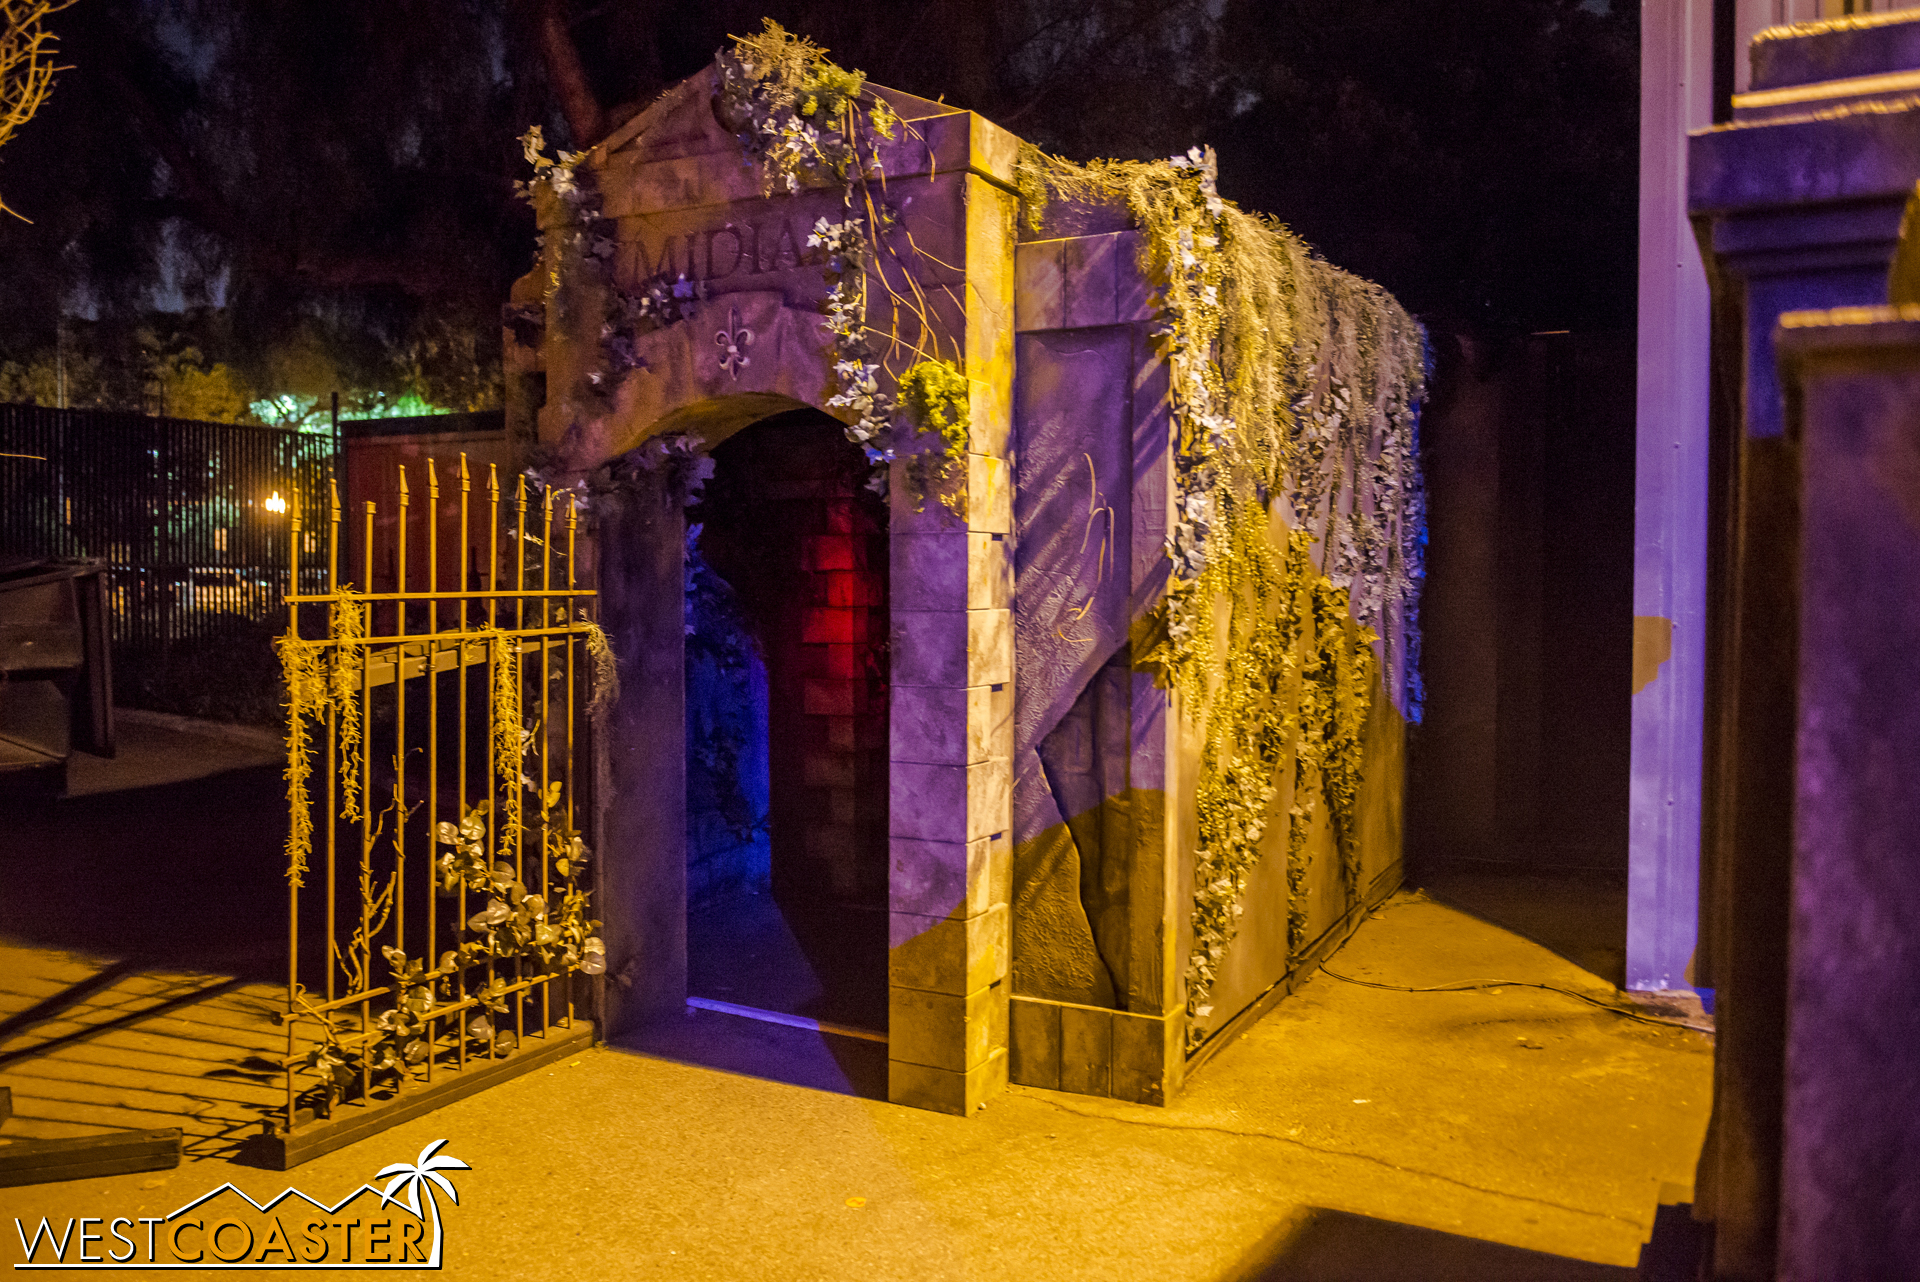  The entrance to Voodoo is through the exit this year.&nbsp; In addition, Fright Lane guests should access Voodoo over by the entrance facade of Trick or Treat, while regular guests access the stand-by line opposite Paranormal Inc. 